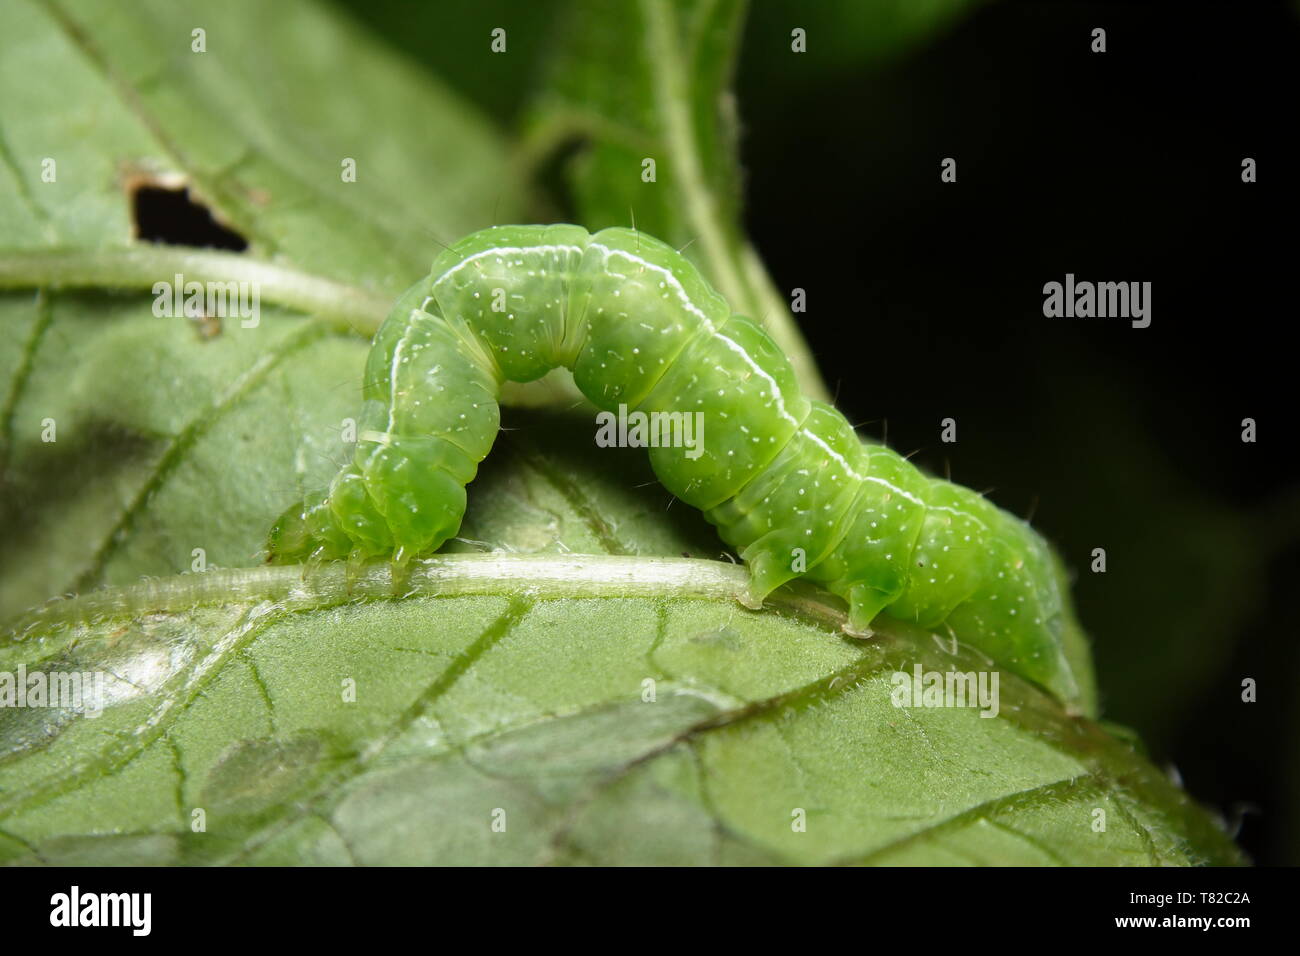 Cabbage White Butterfly Caterpillar feeding on the underside of a potato plant leaf. Stock Photo